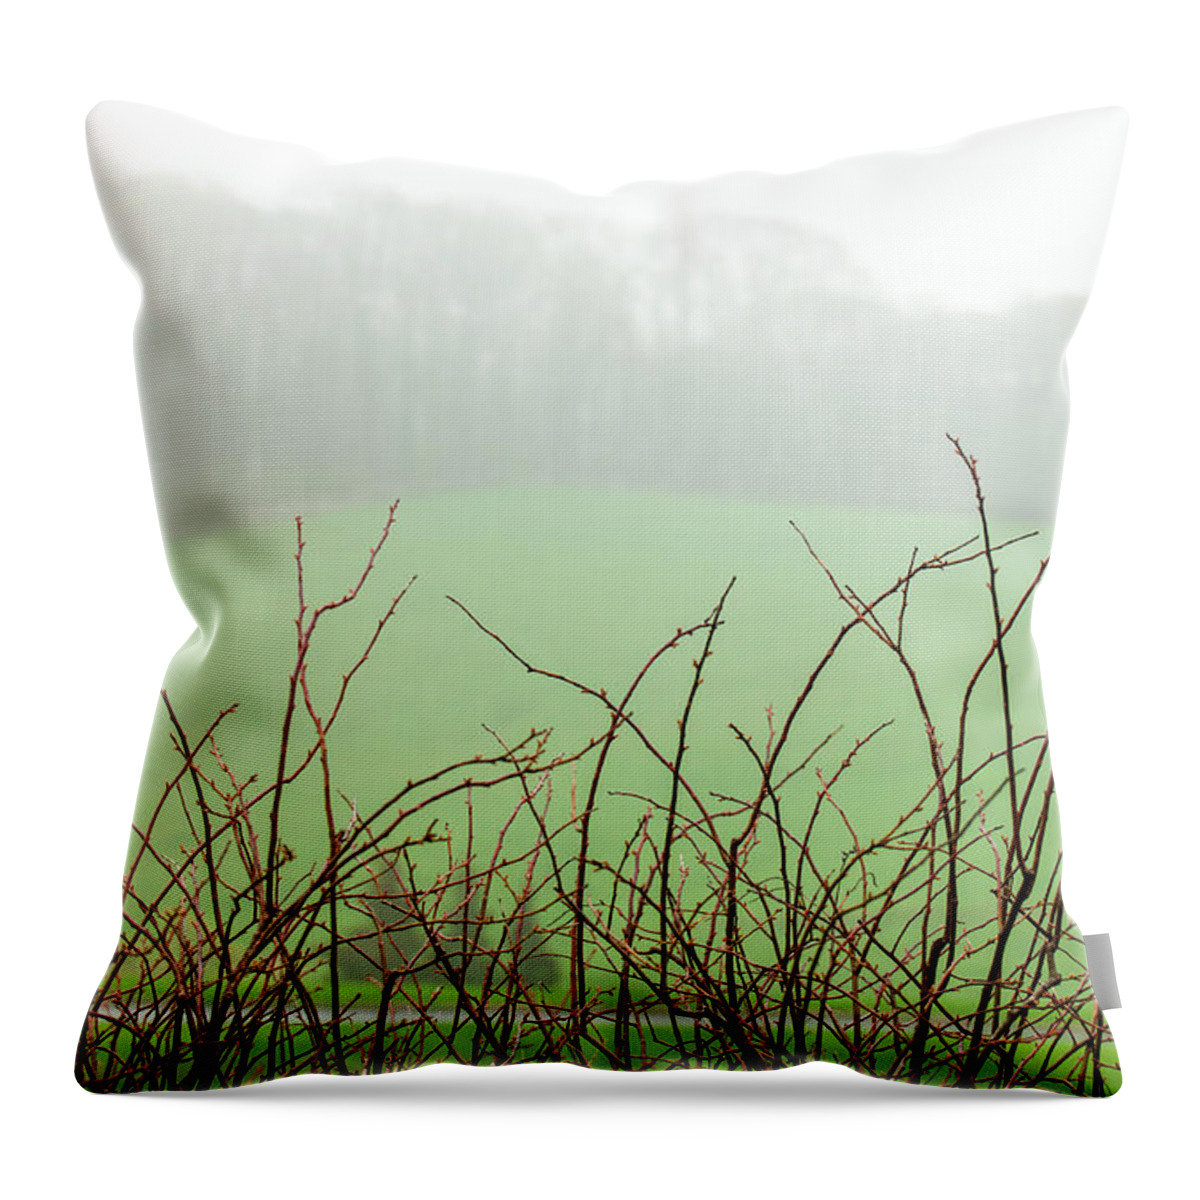 Minimalist Throw Pillow featuring the photograph Twigs in Mist by Ginger Stein